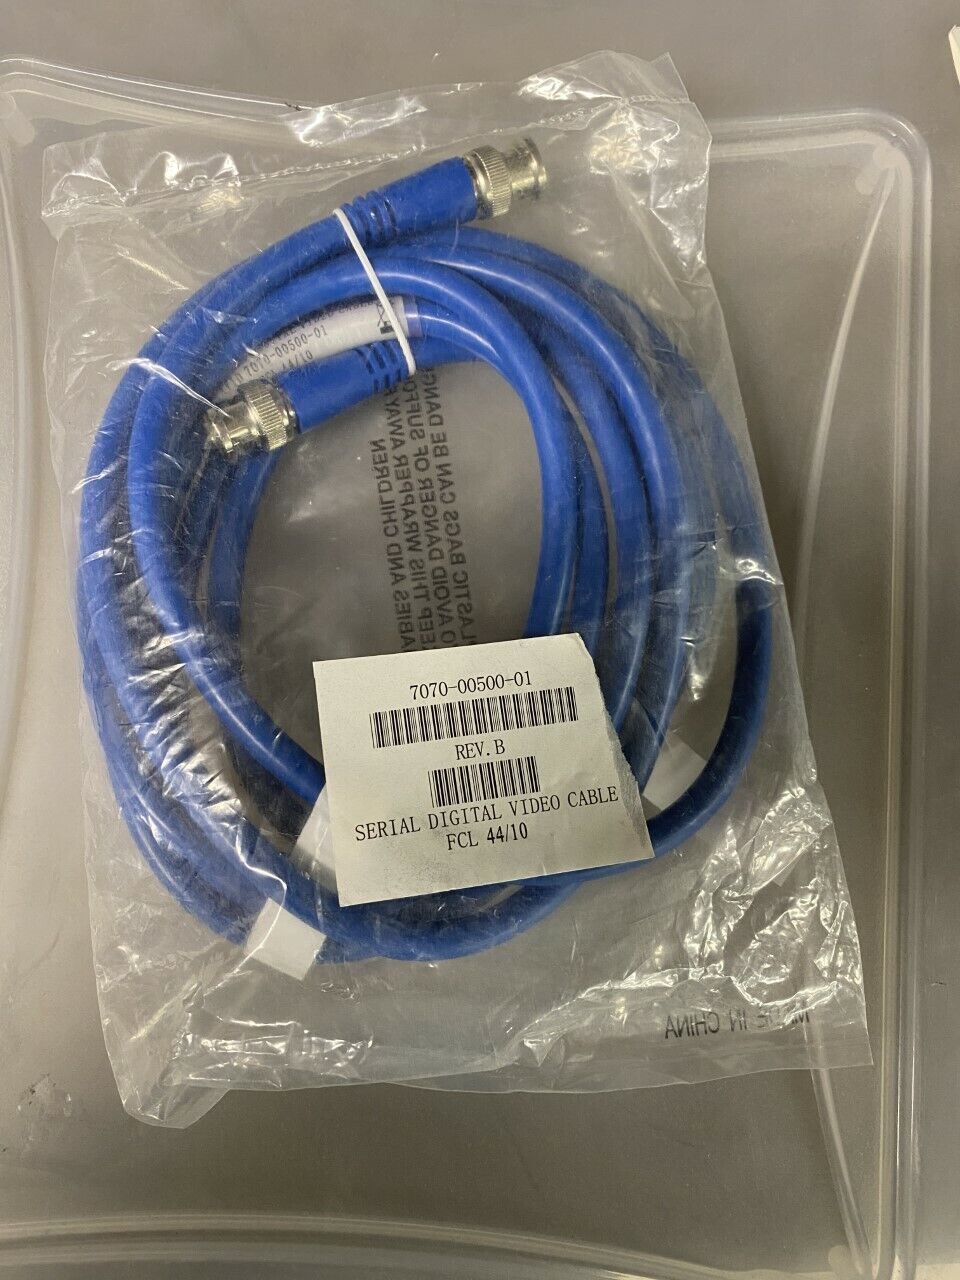 Serial Digital Video Cable, NEW, Avid 0070-00500-01 Blue 6' FCL 42/13